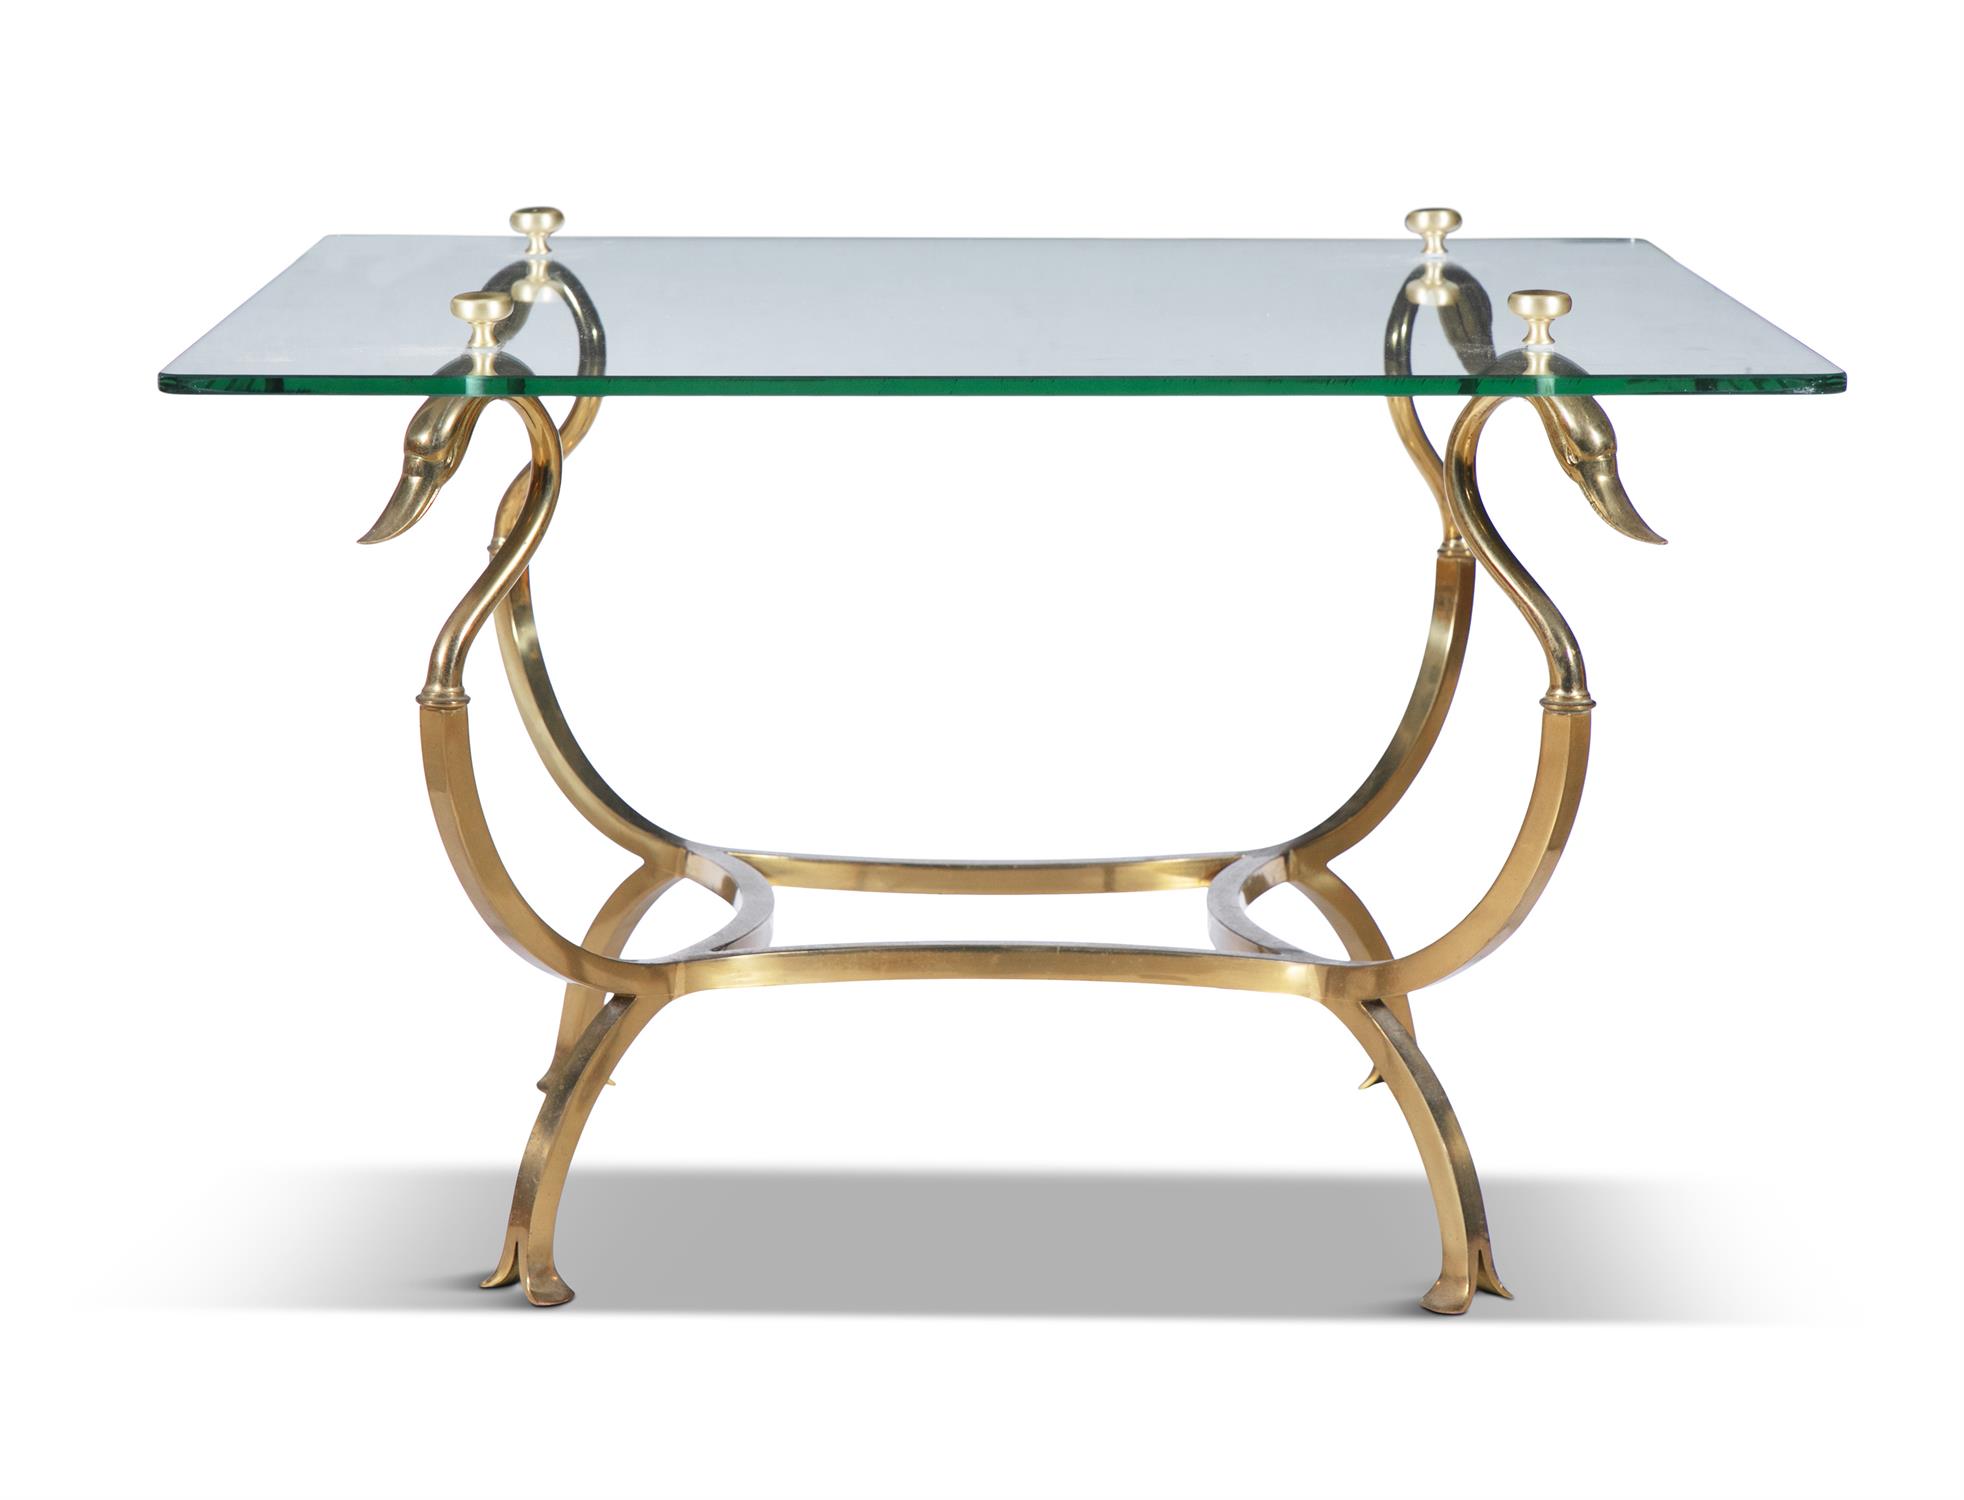 COFFEE TABLE A brass based coffee table with swan head supports and glass top, attributed to